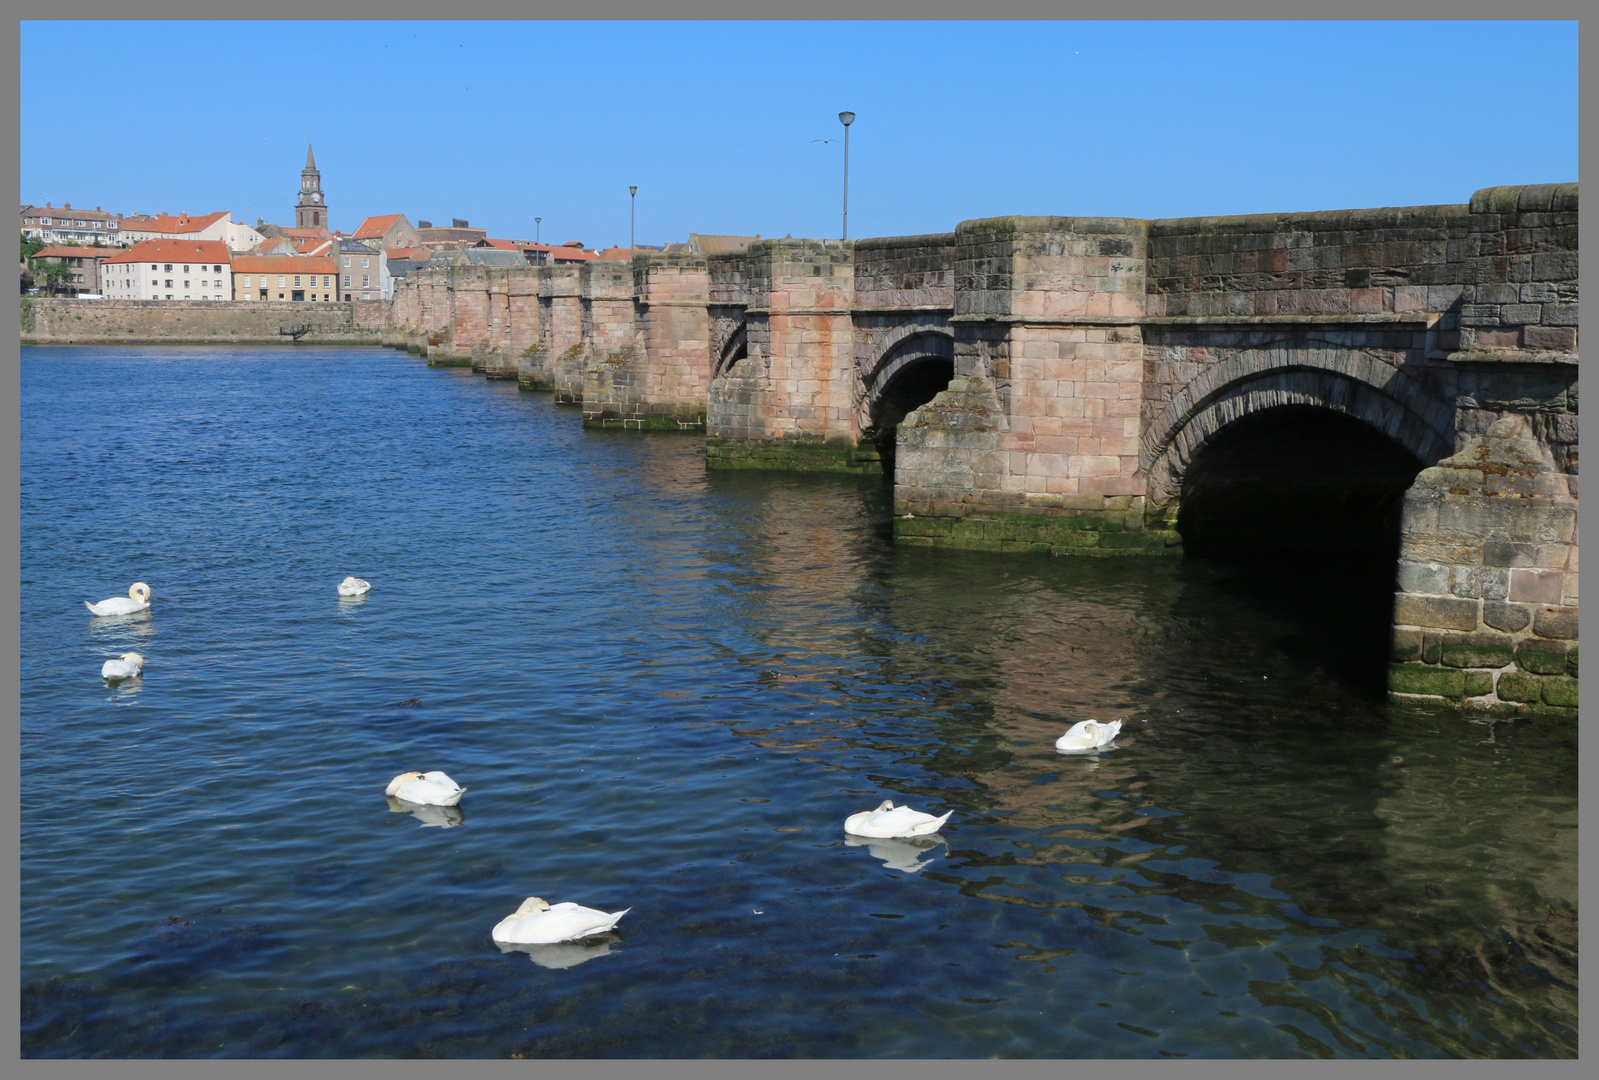 the 17th century bridge 5A over the River Tweed at Berwick